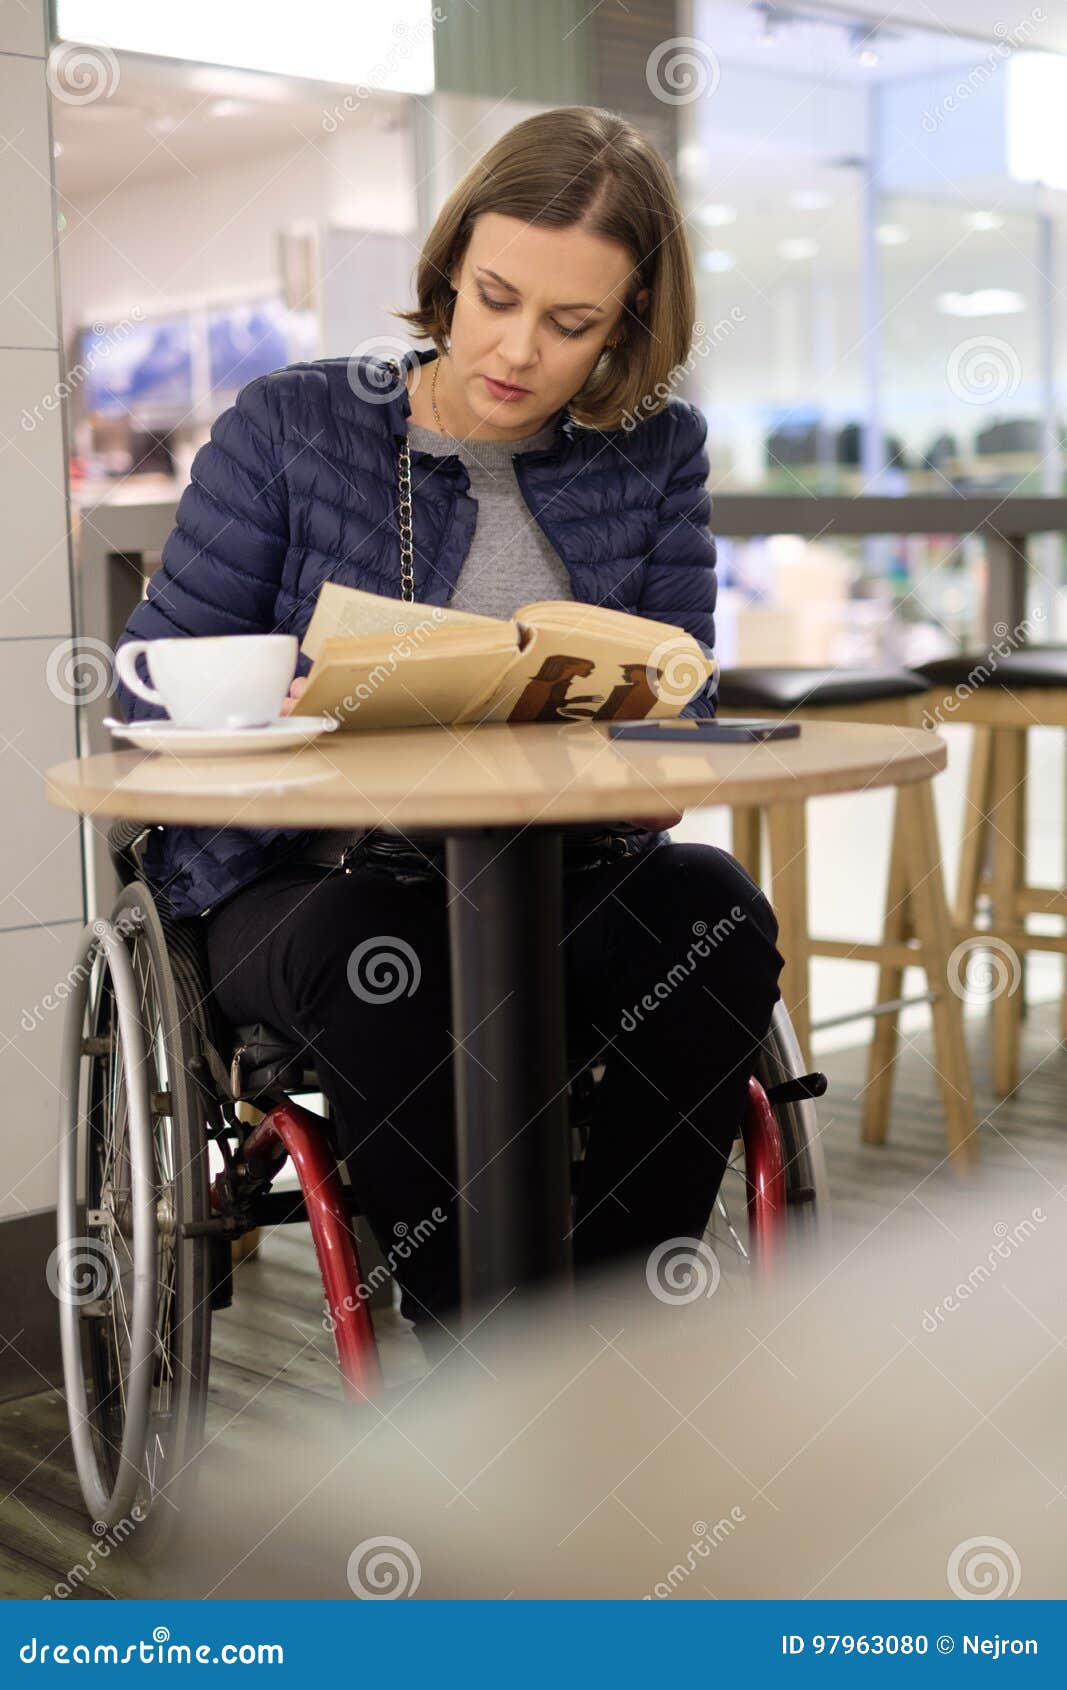 physically challenged woman reading in a cafe